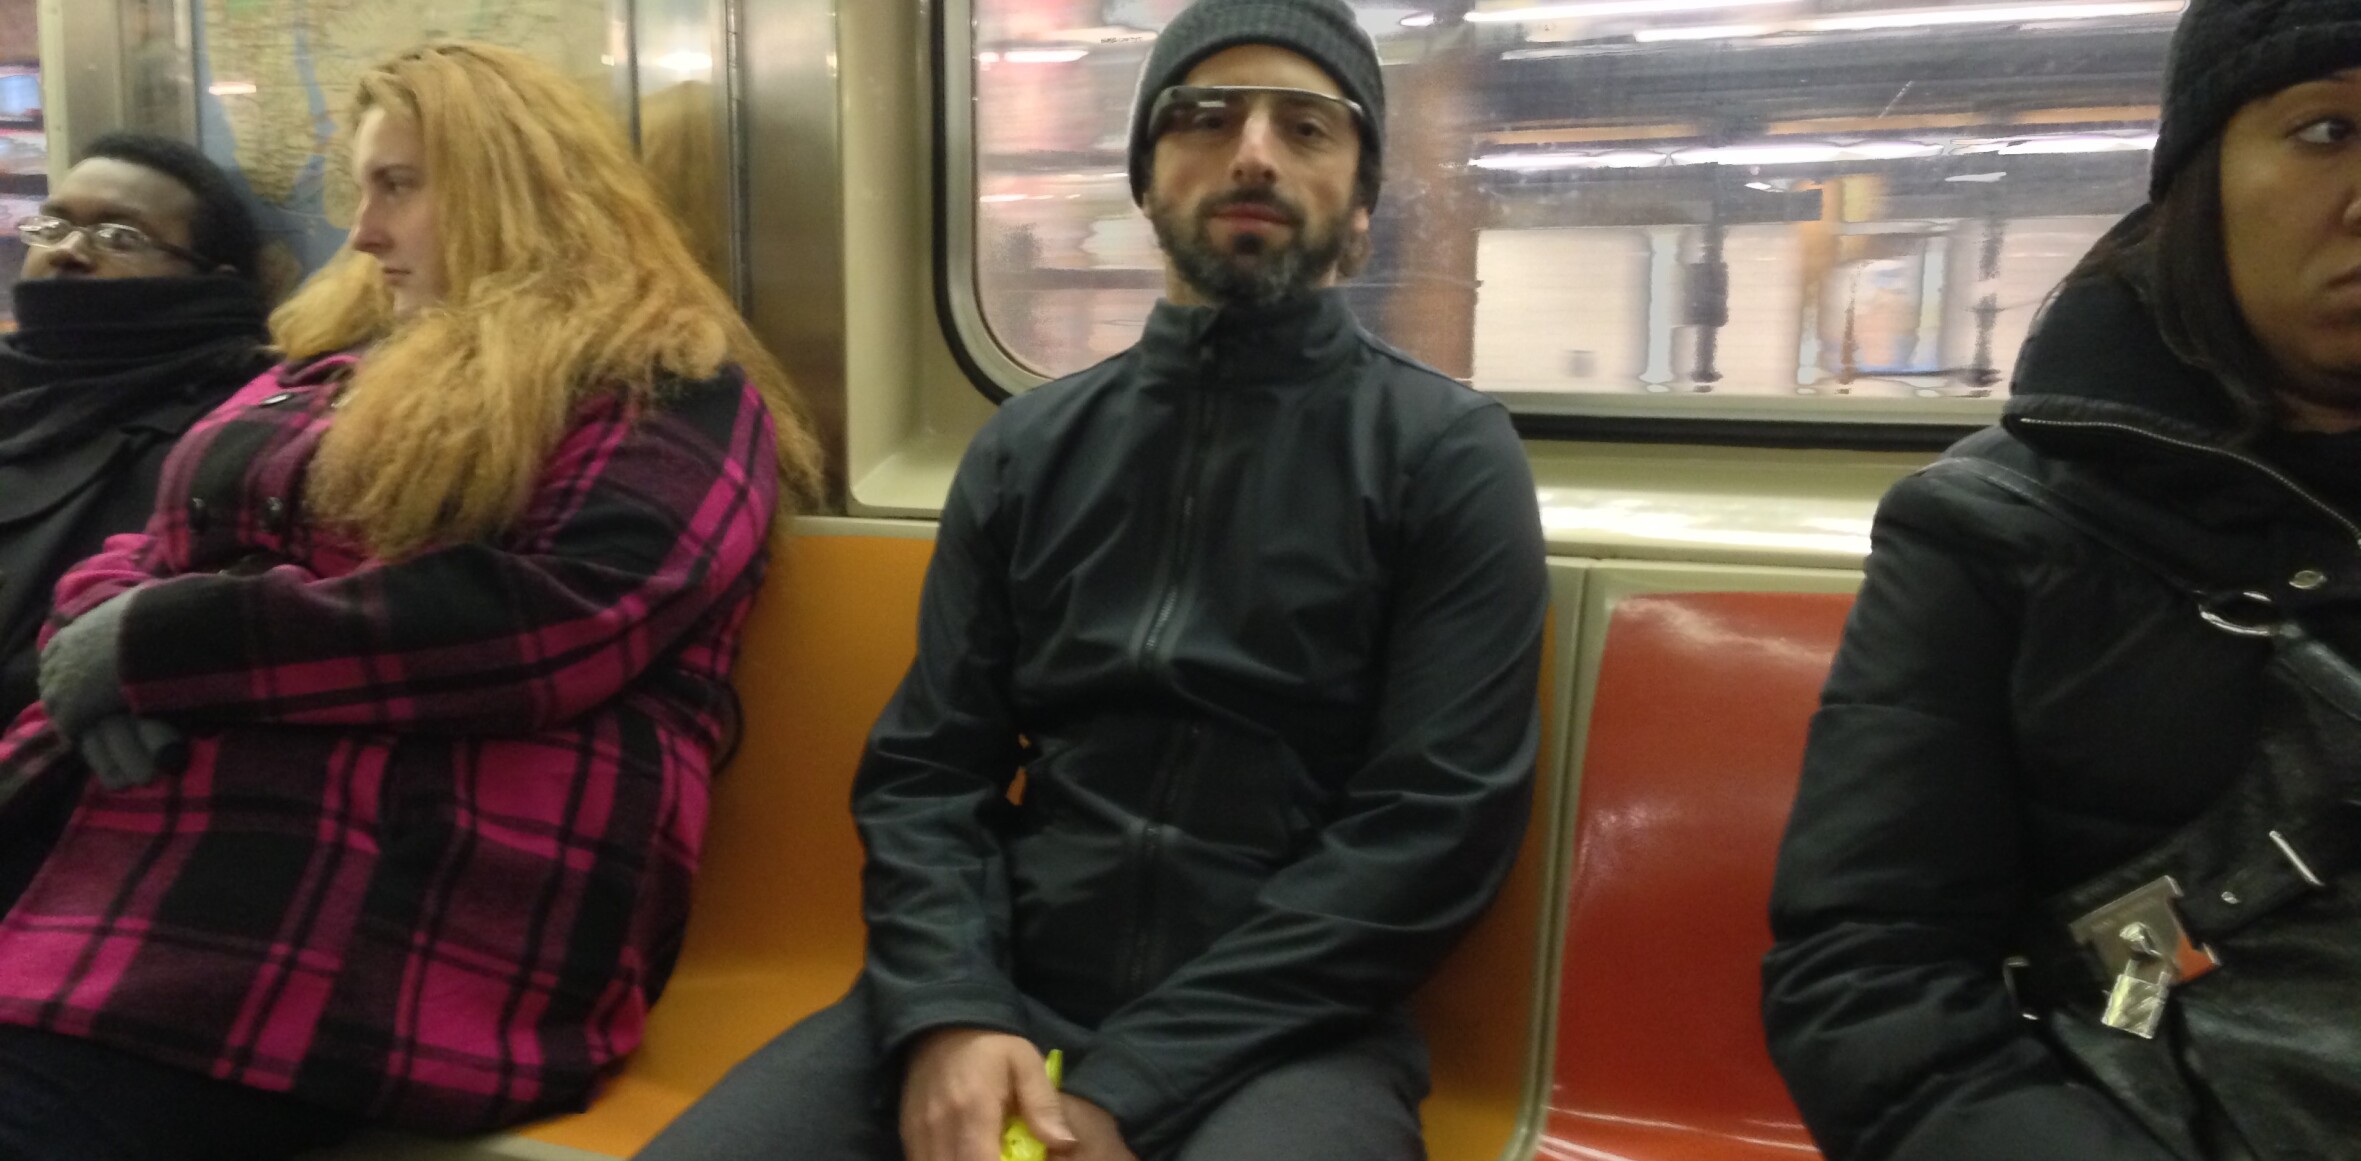 Spotted: Sergey Brin wearing Google Glass specs as he blends in on NYC subway